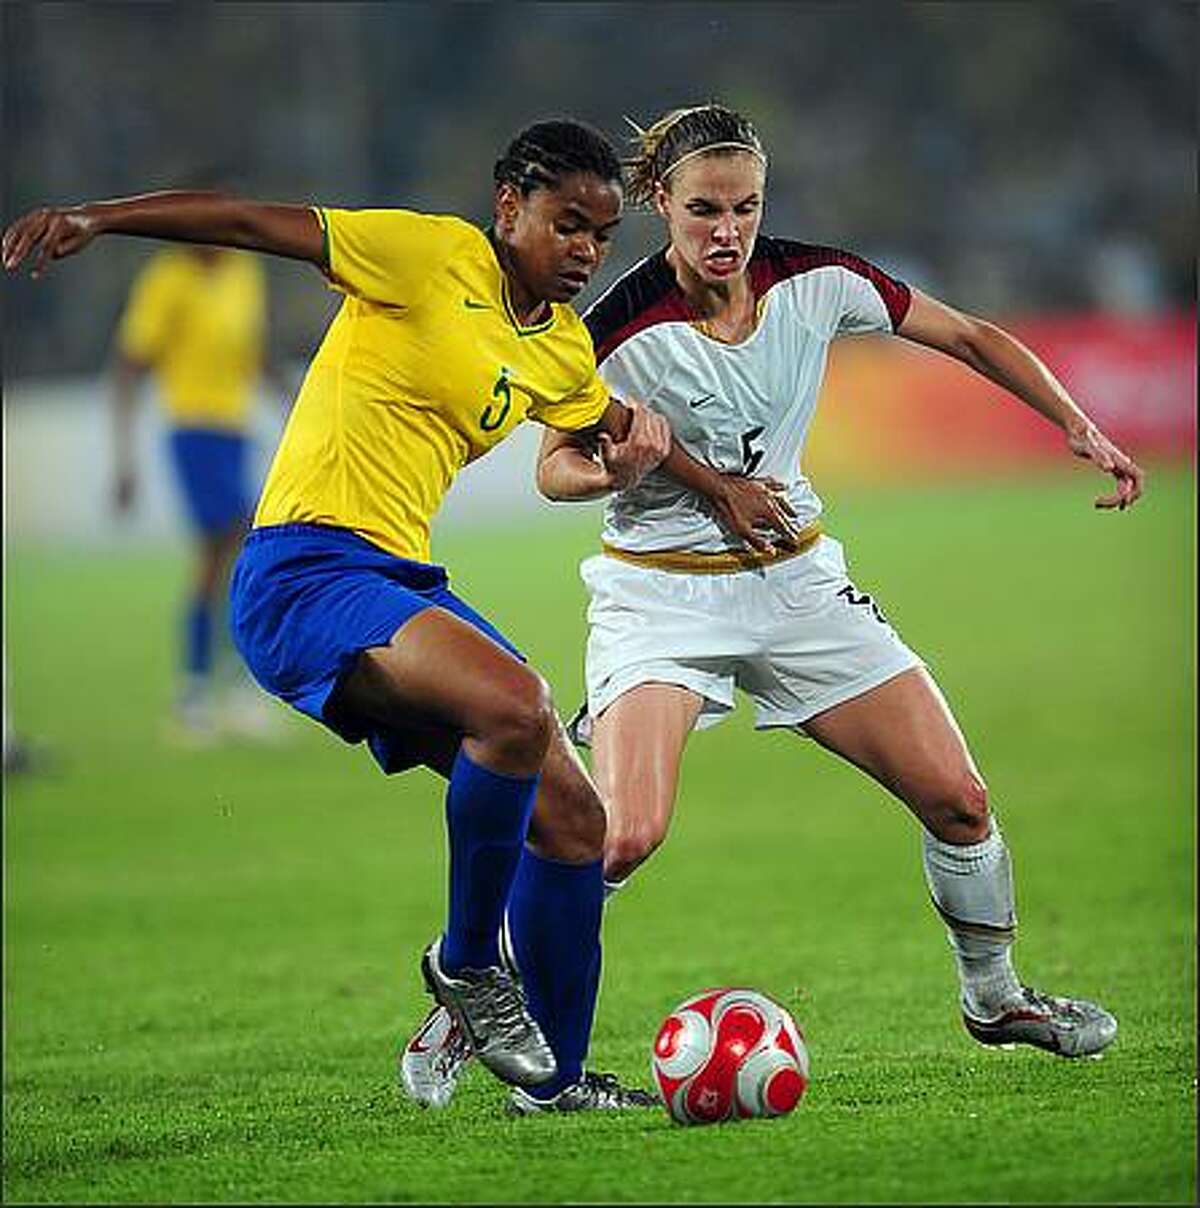 Renata Costa (L) of Brazil vies with Lindsay Tarpley from US during the women's gold medal football match in the 2008 Beijing Olympic Games in Beijing.